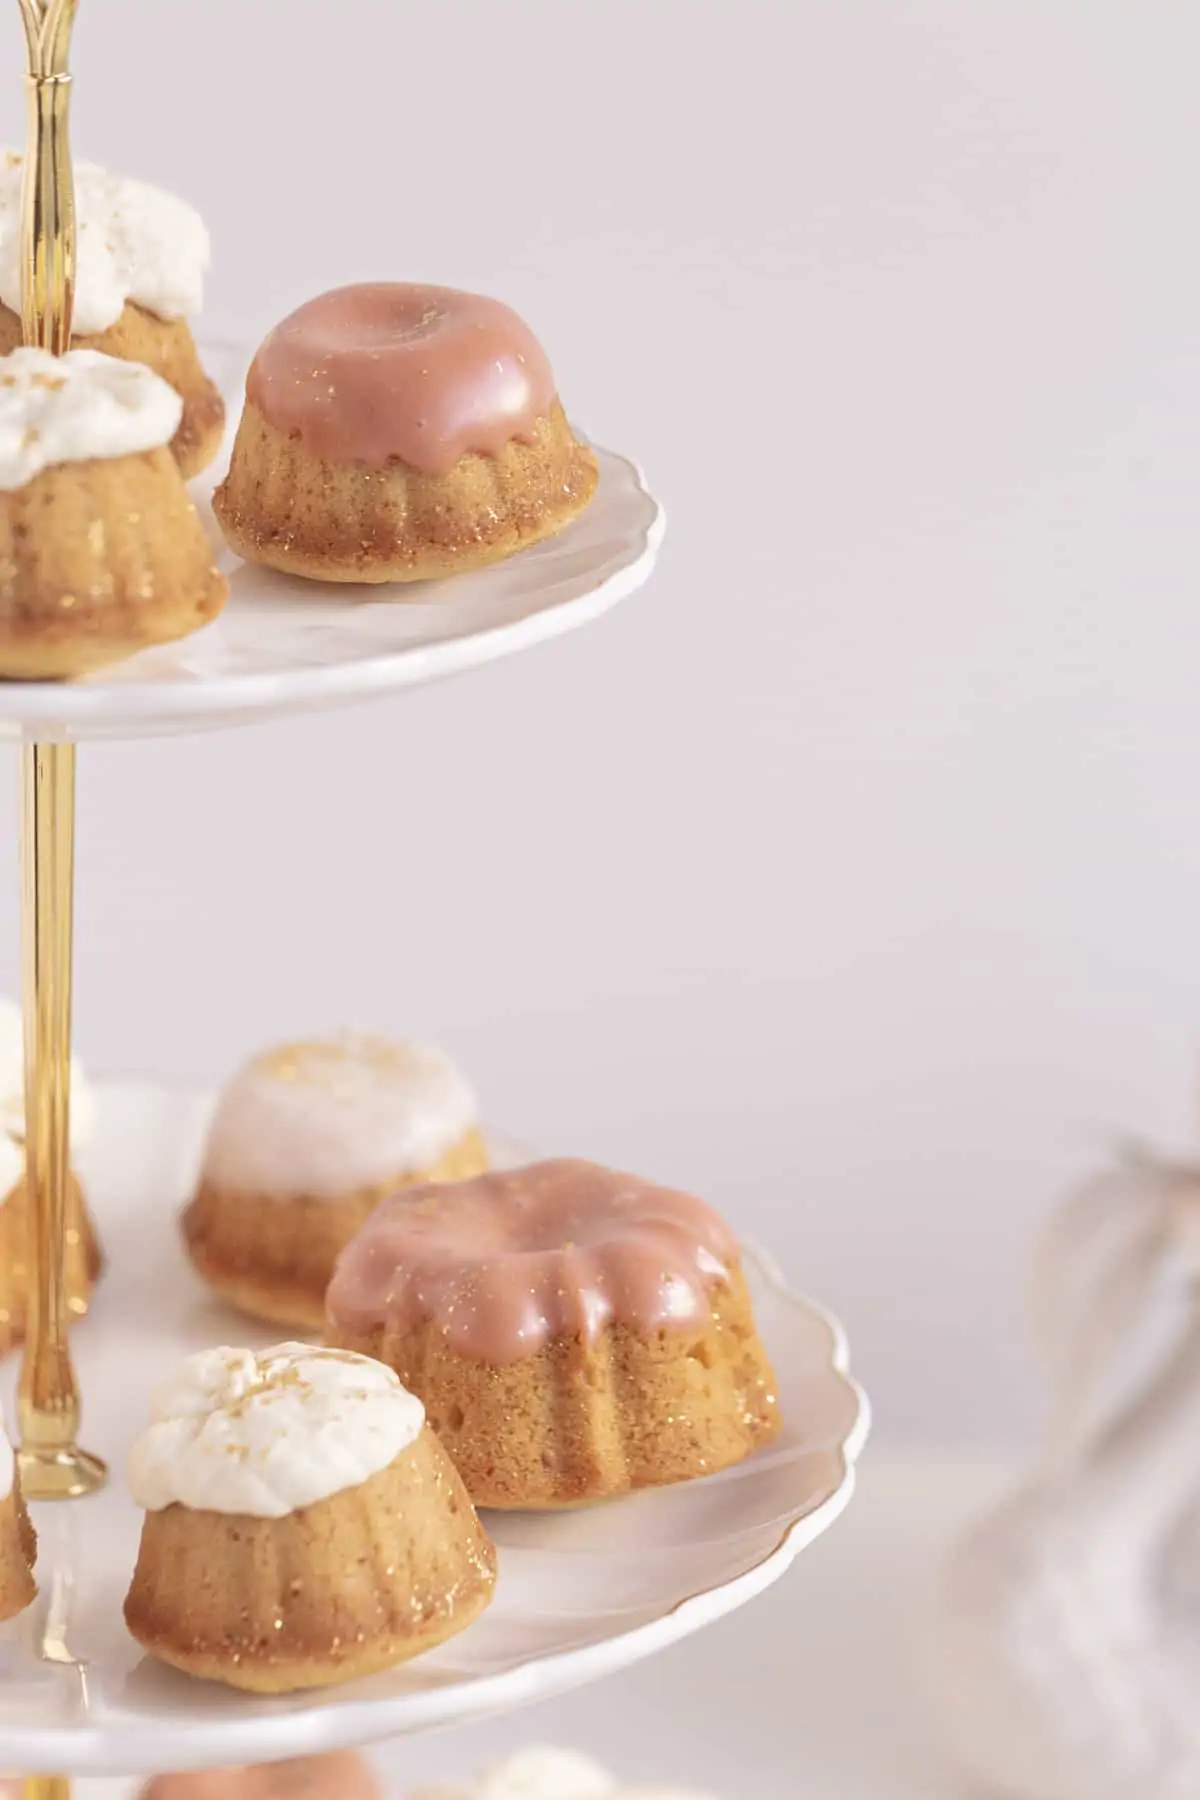 honey cakes on a cake stand with pink icing and whipped cream